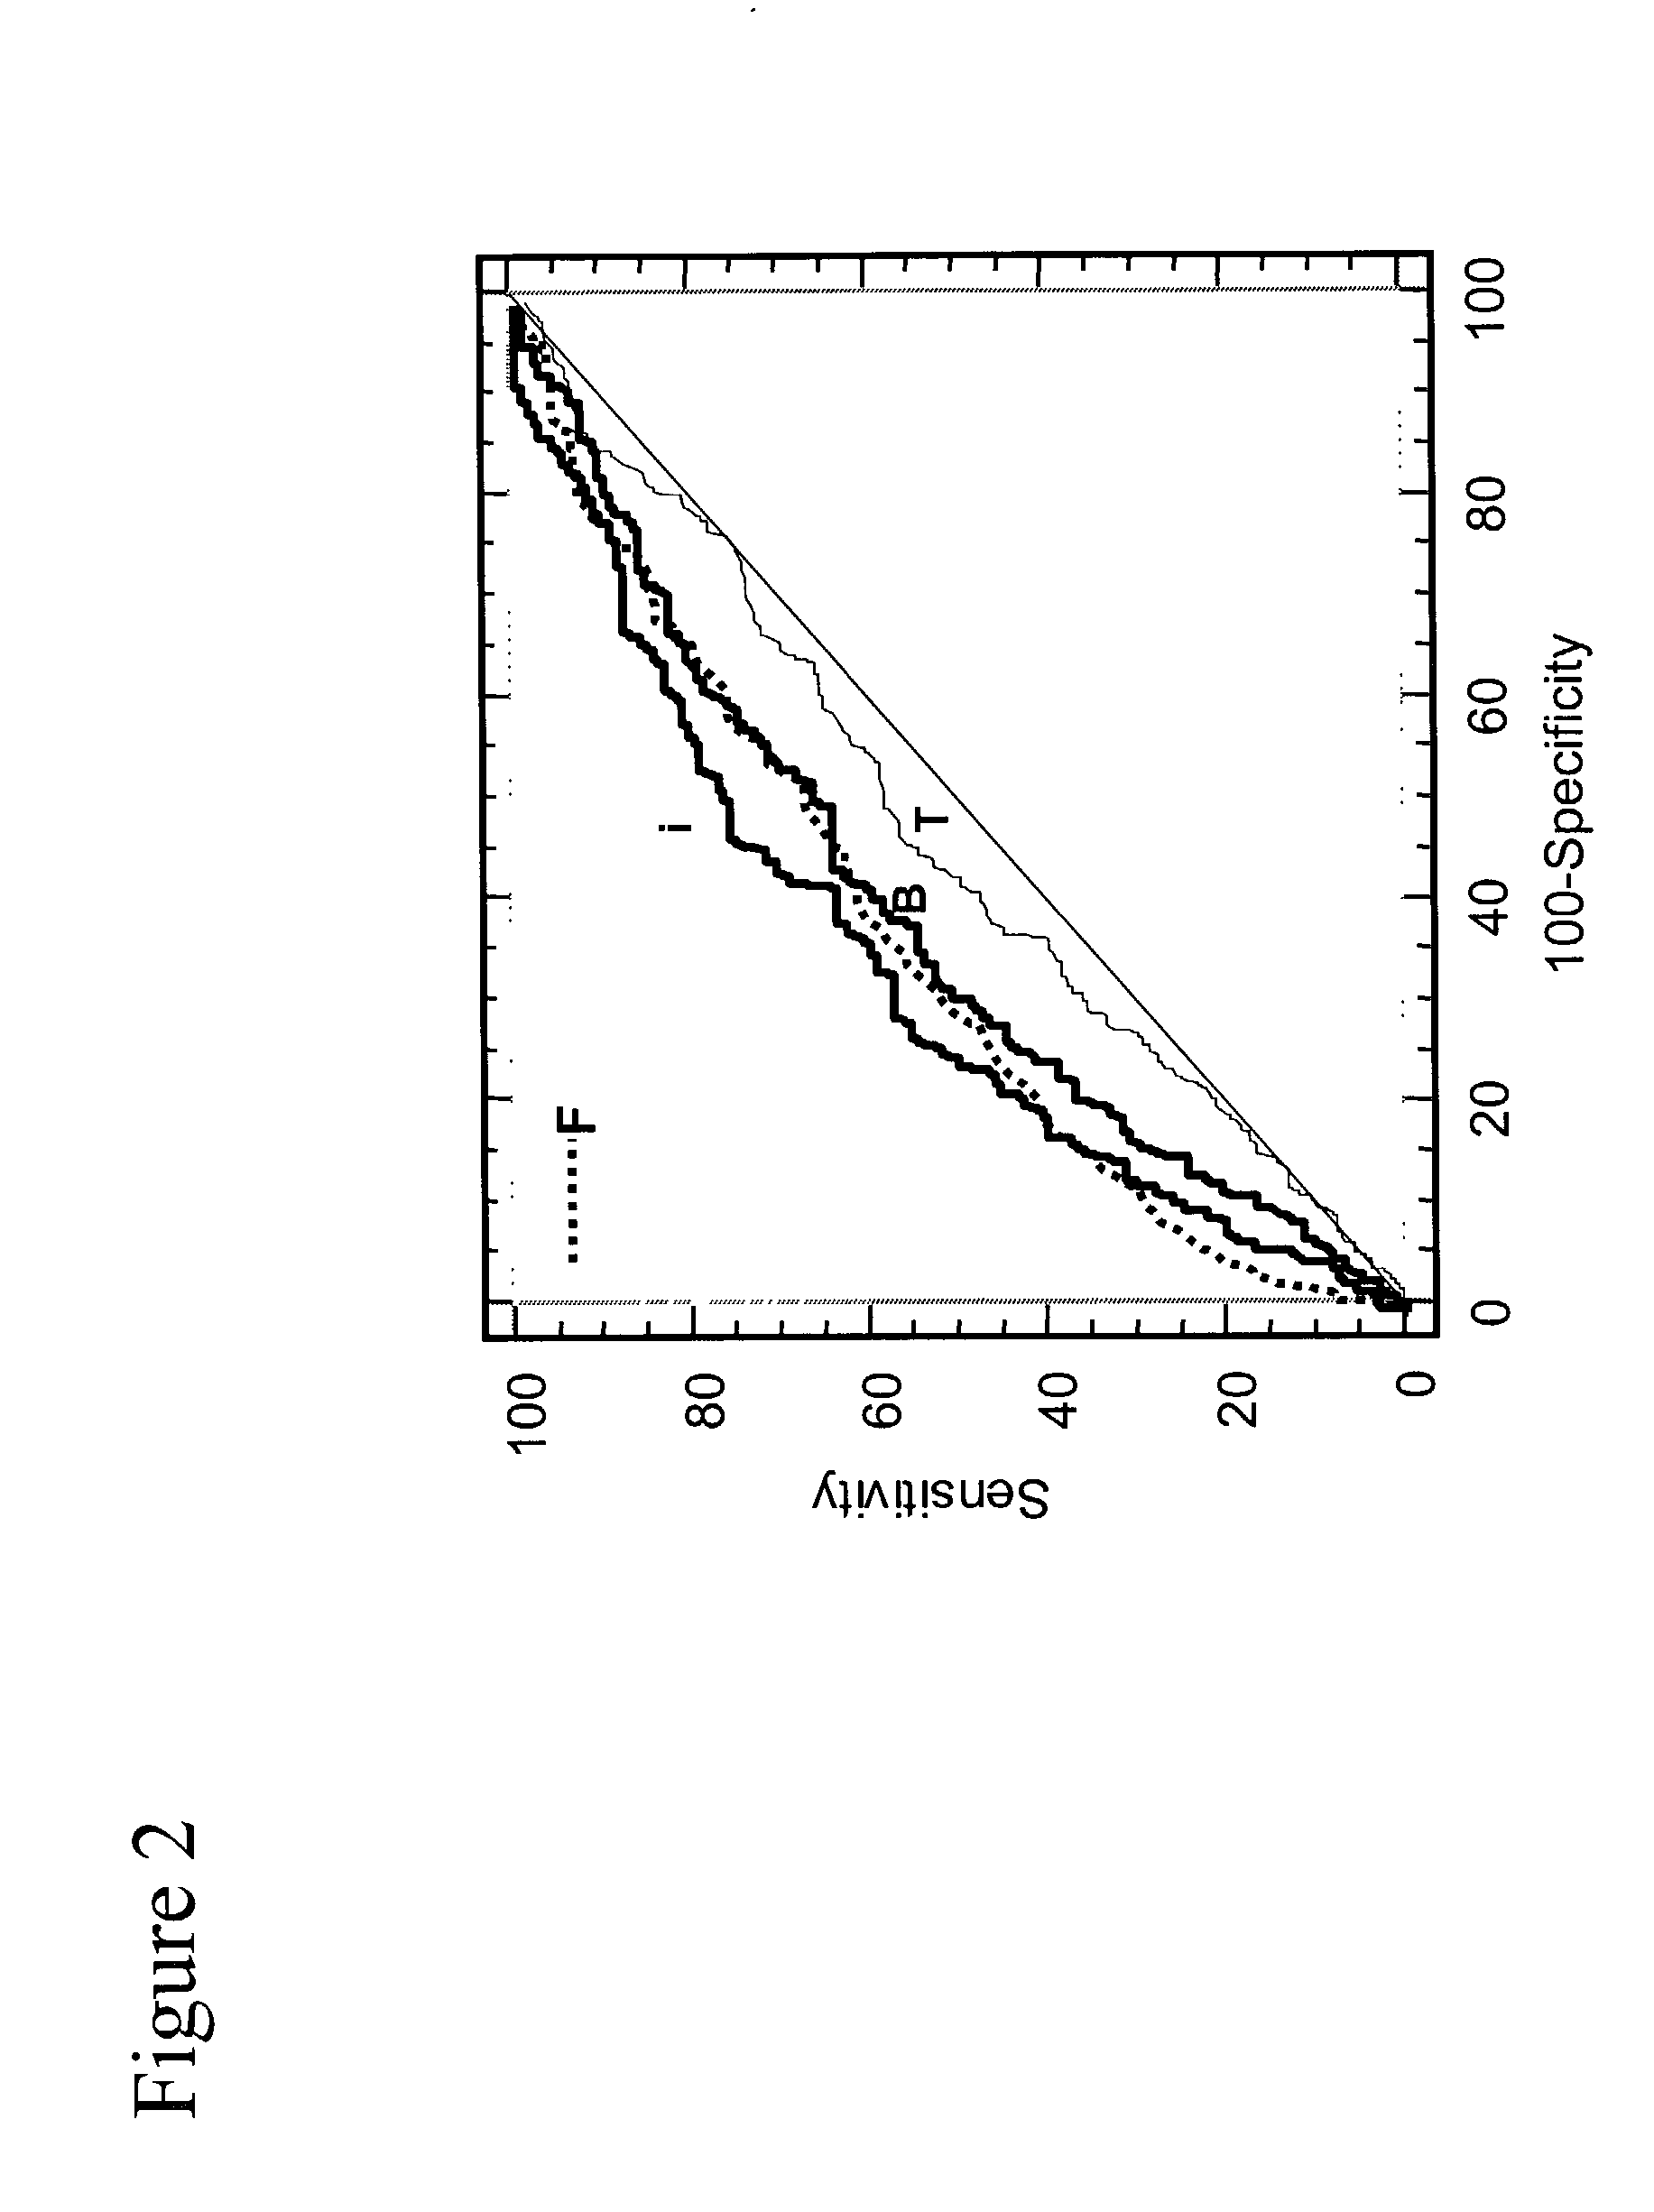 Method of analyzing non-complexed forms of prostate specific antigen in a sample to improve prostate cancer detection